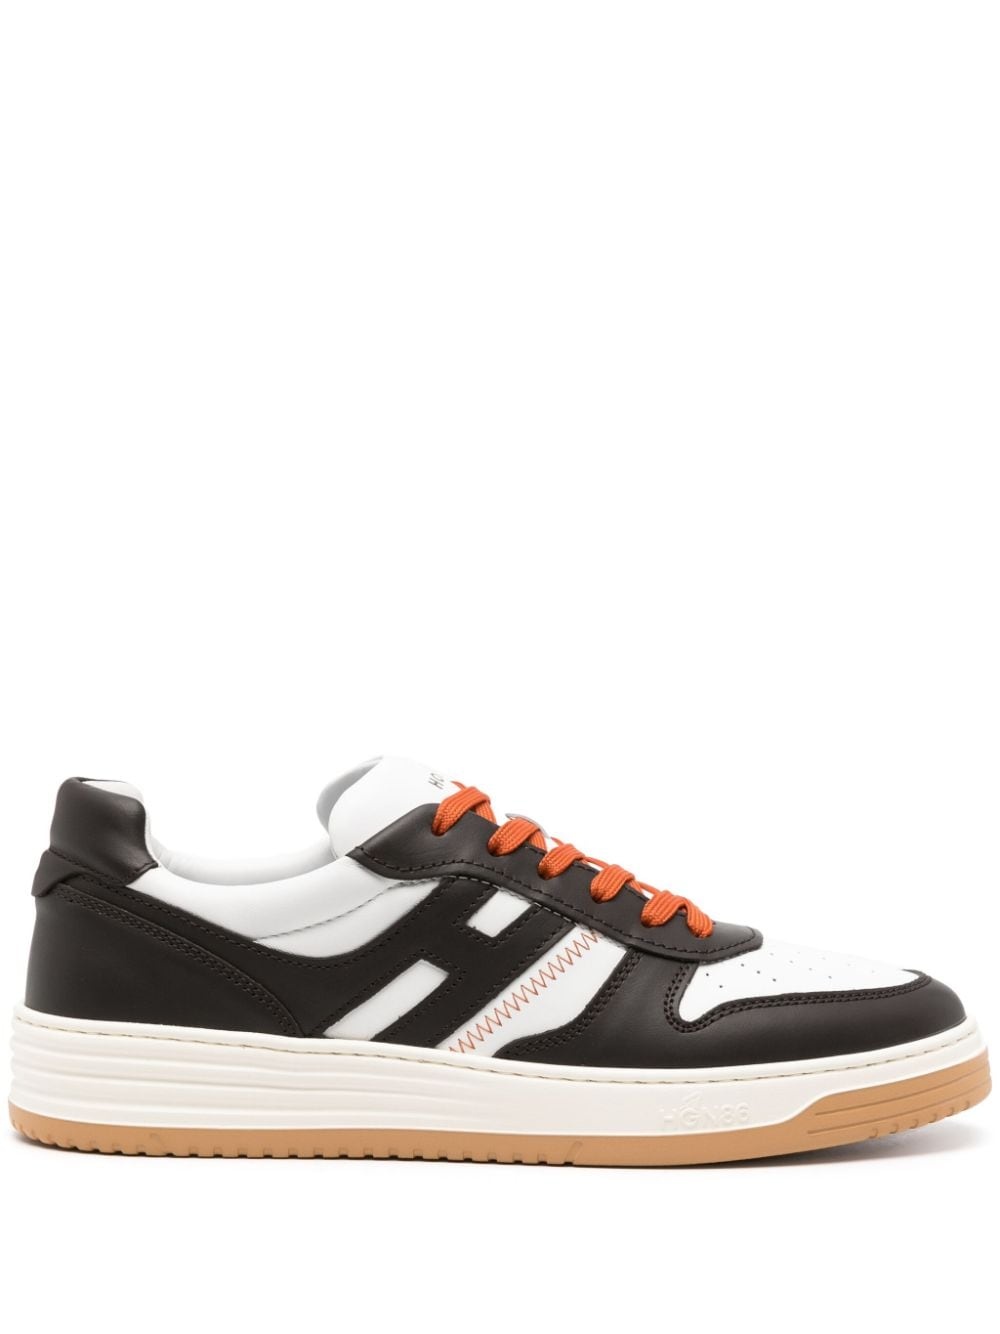 H630 leather sneakers - 1